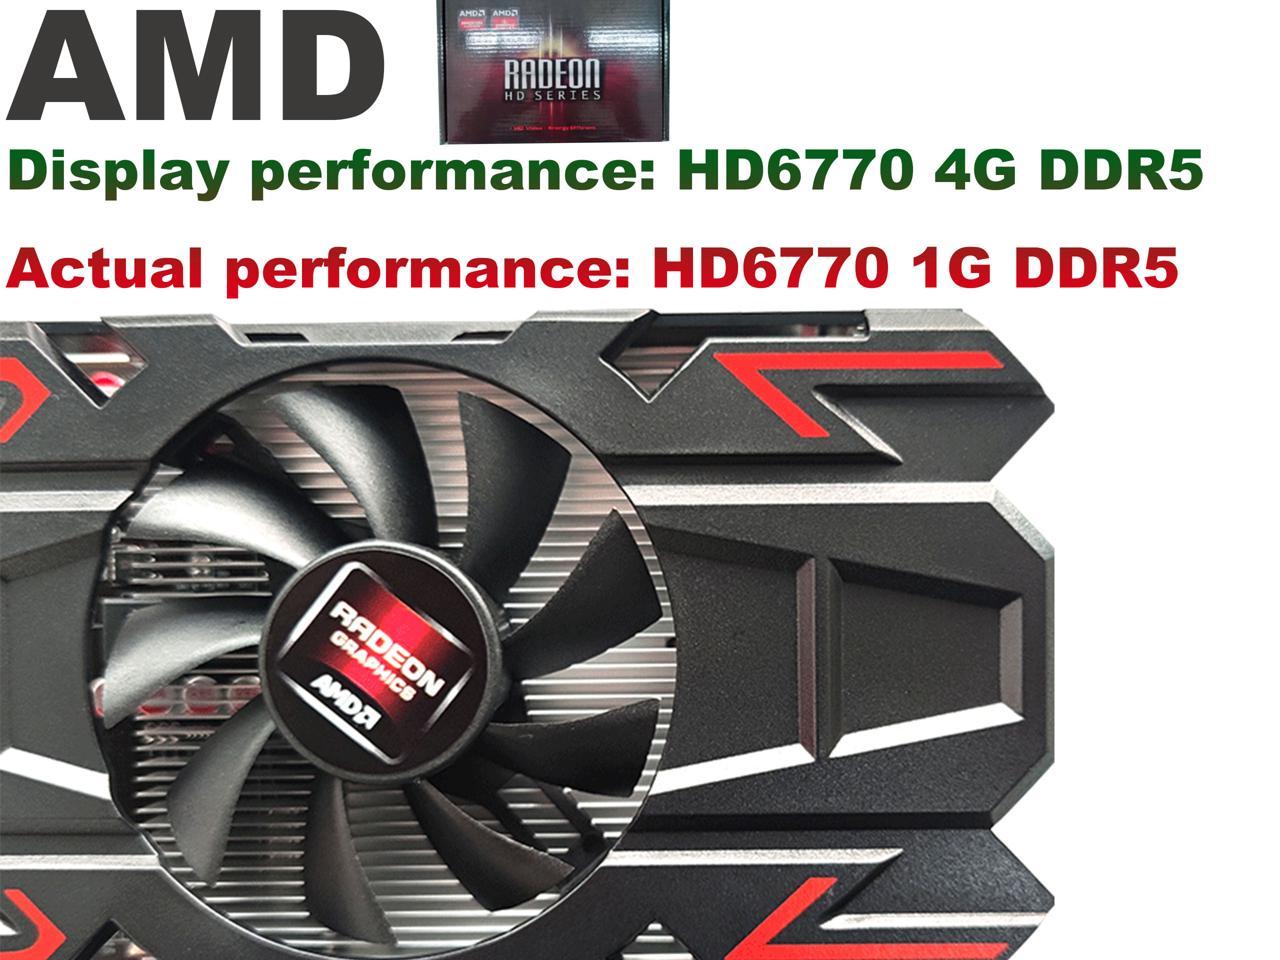 XXG Graphics Card HD6770 4G DDR5 High Definition Desktop Computer Graphics Card Game Discrete Graphics Card PC Graphics Cards 